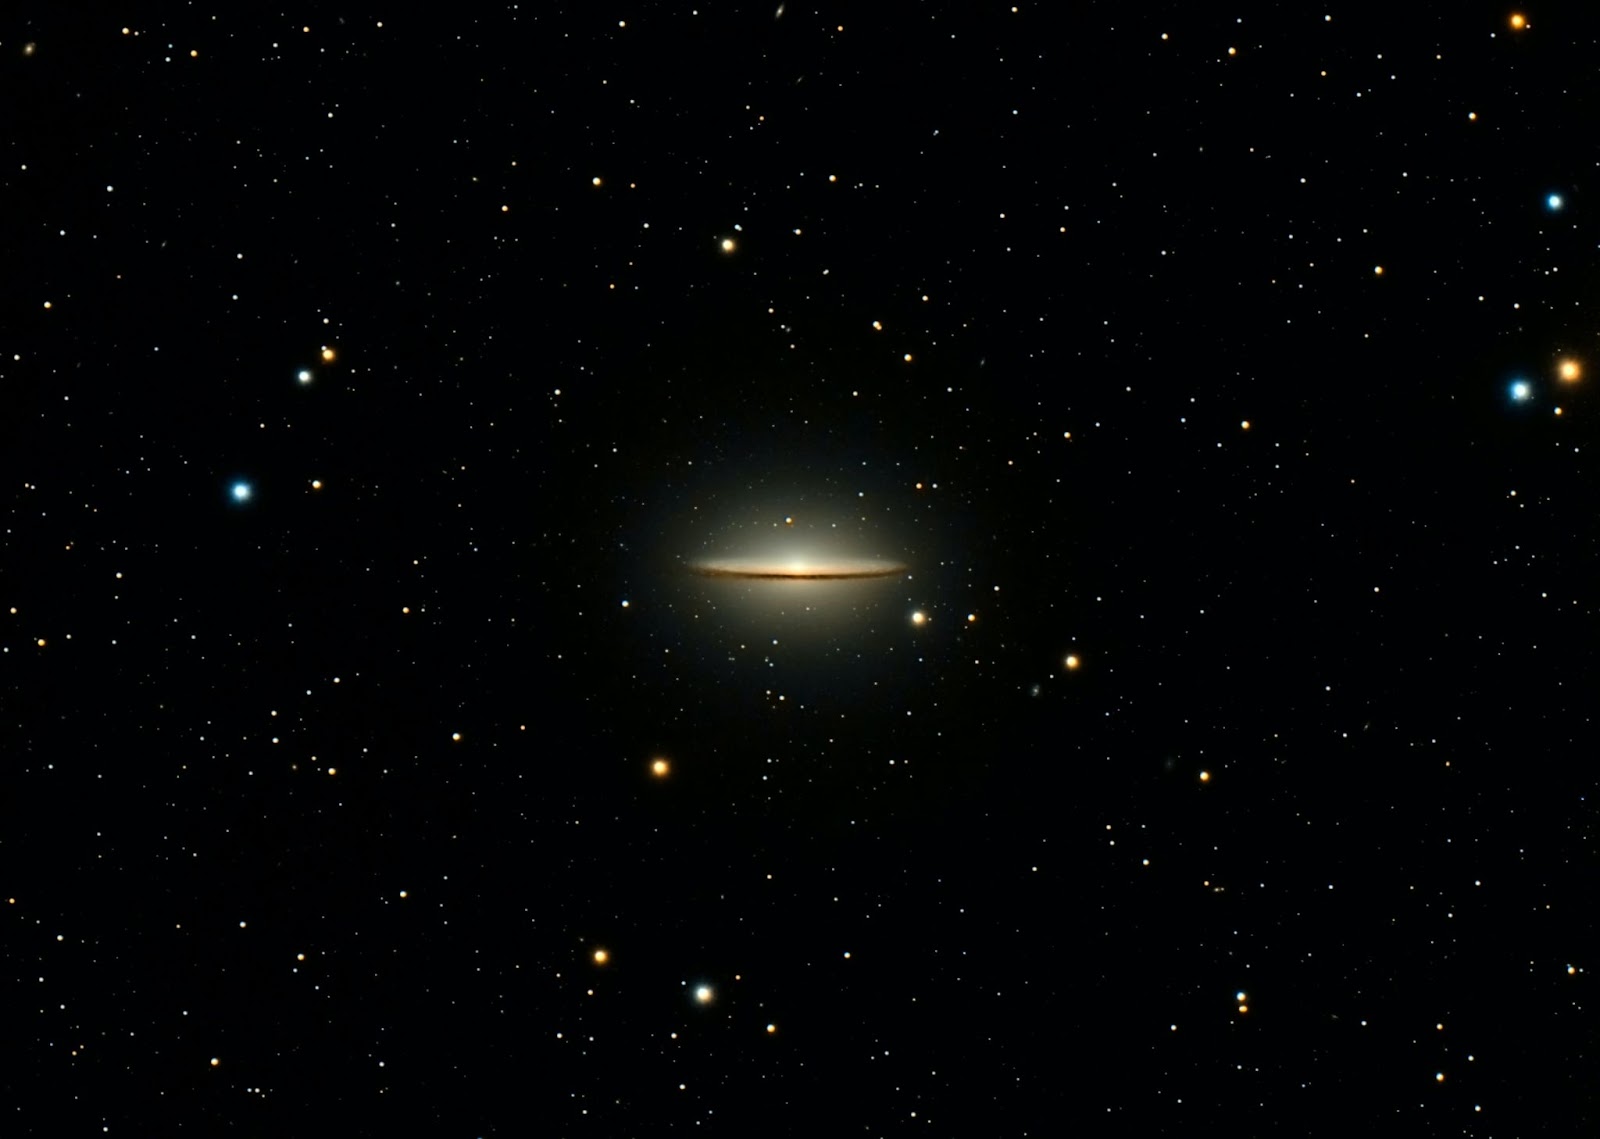 What Is the Sombrero Galaxy? And Why Is It So Majestic?